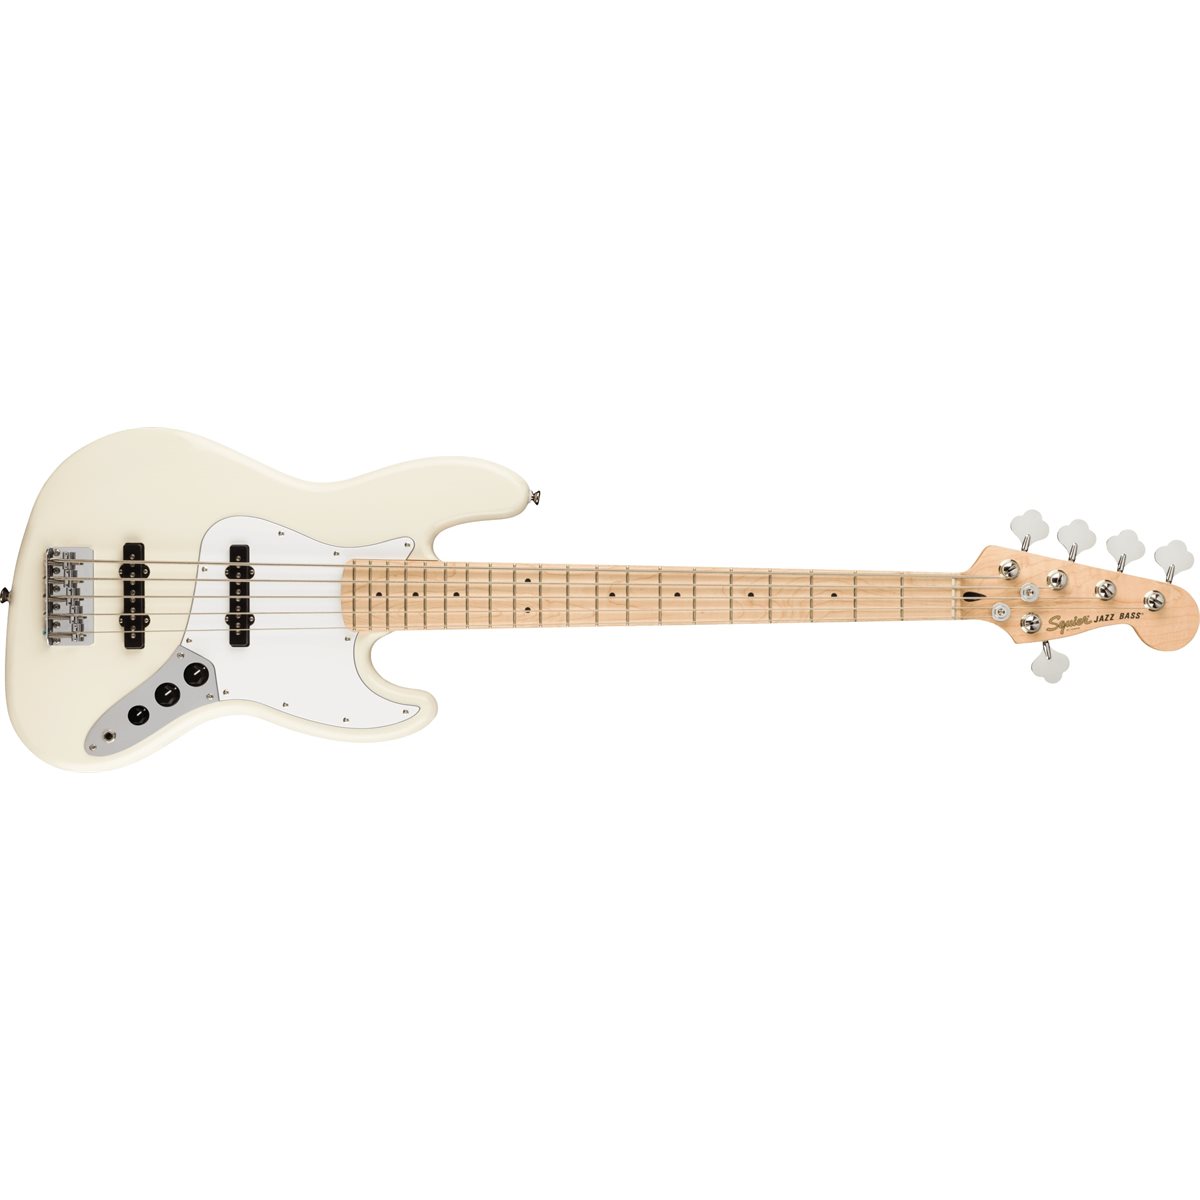 FENDER - AFFINITY SERIES™ JAZZ BASS® - 5 strings - Olympic White